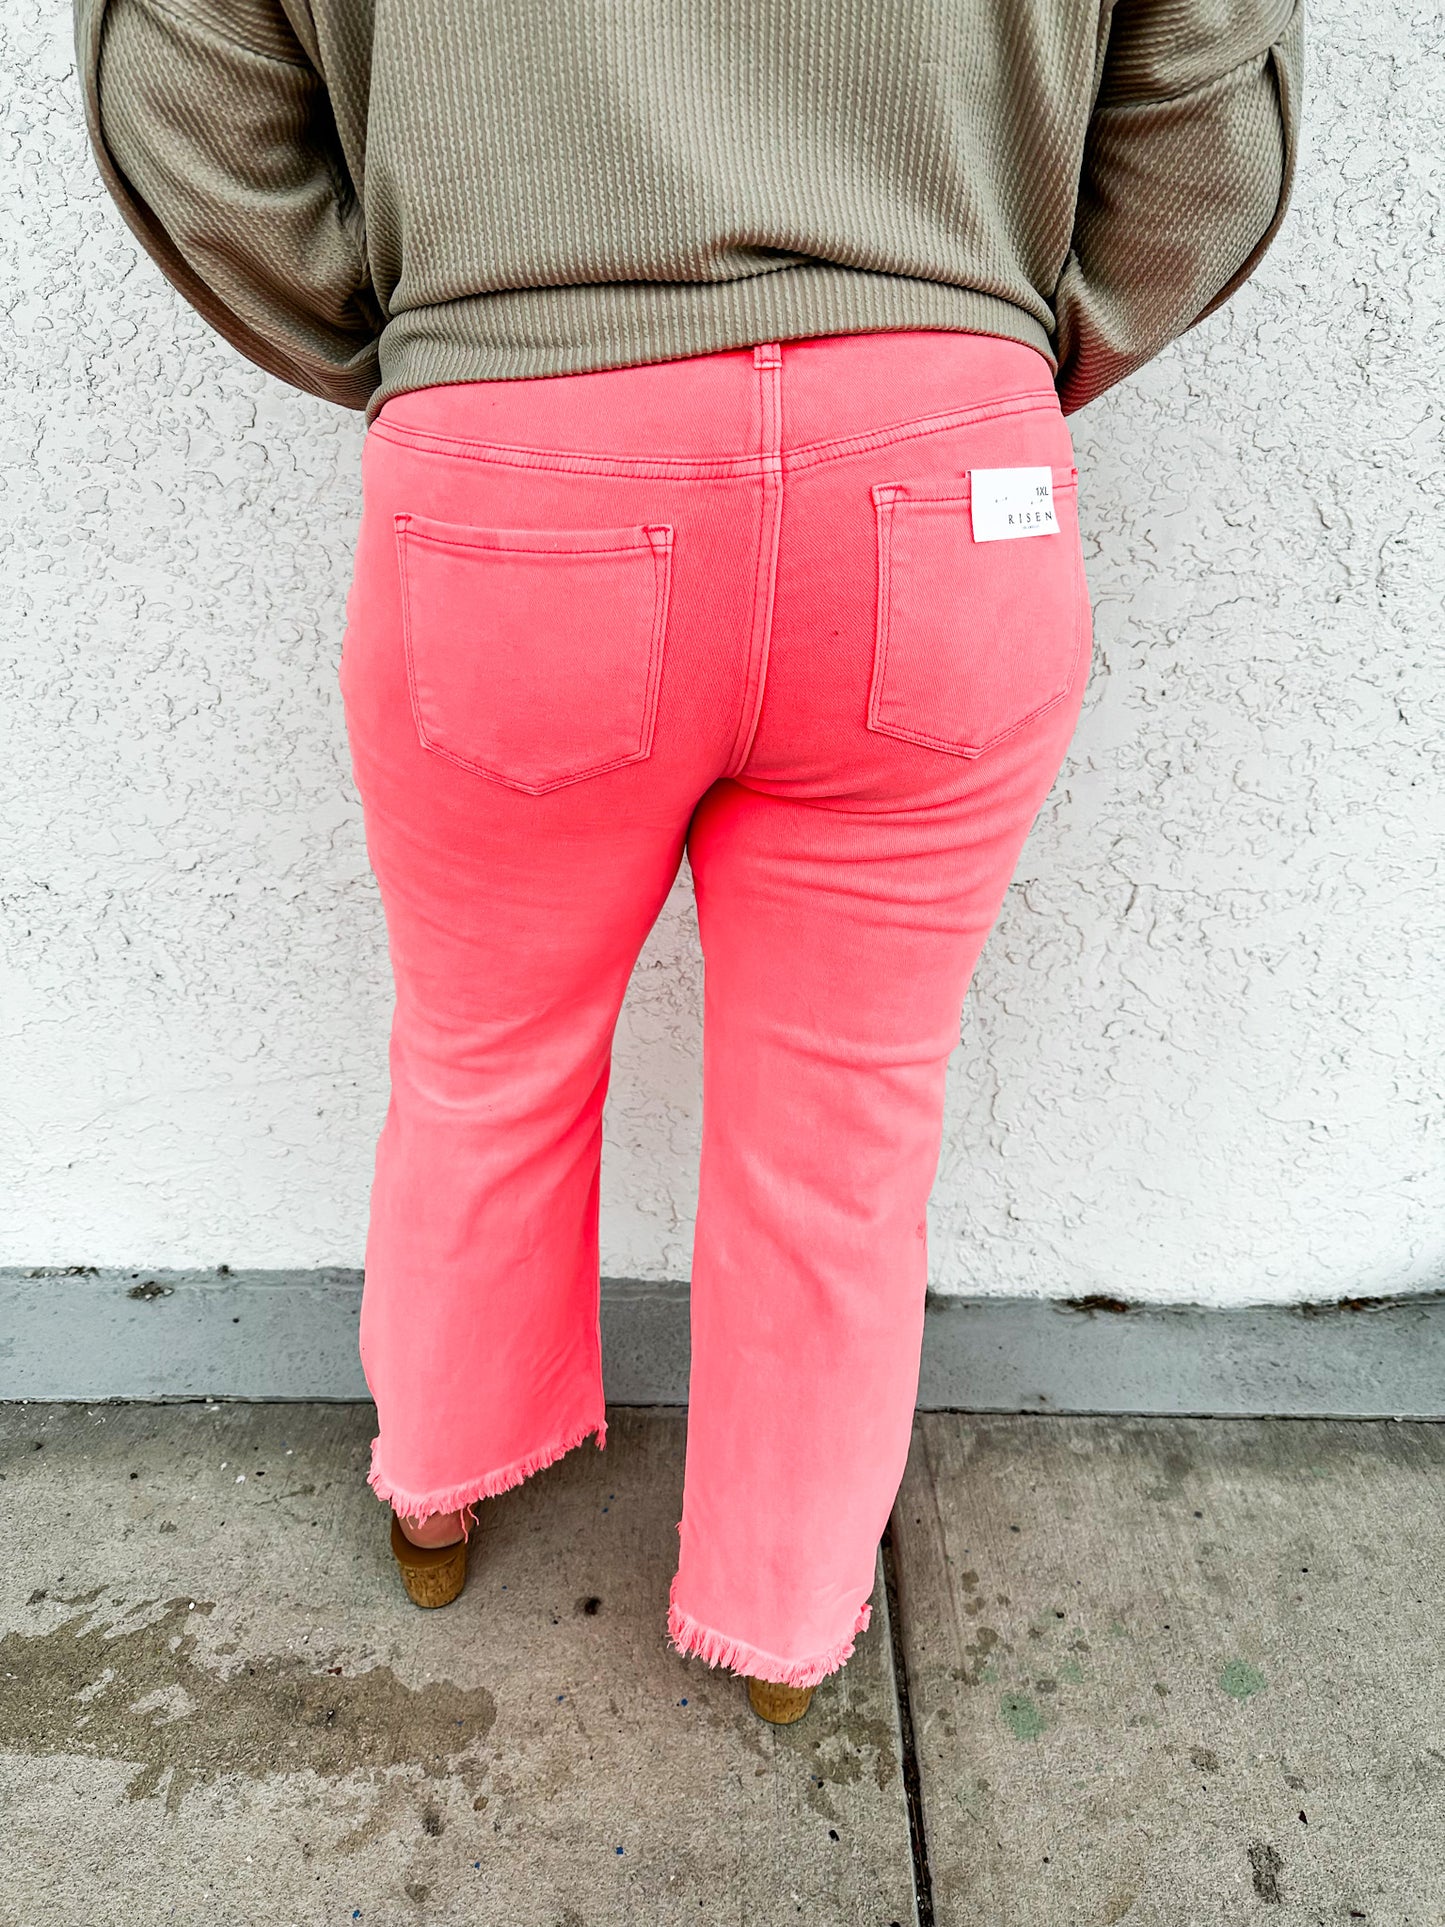 Corally Yours Jeans - Reg/Curvy